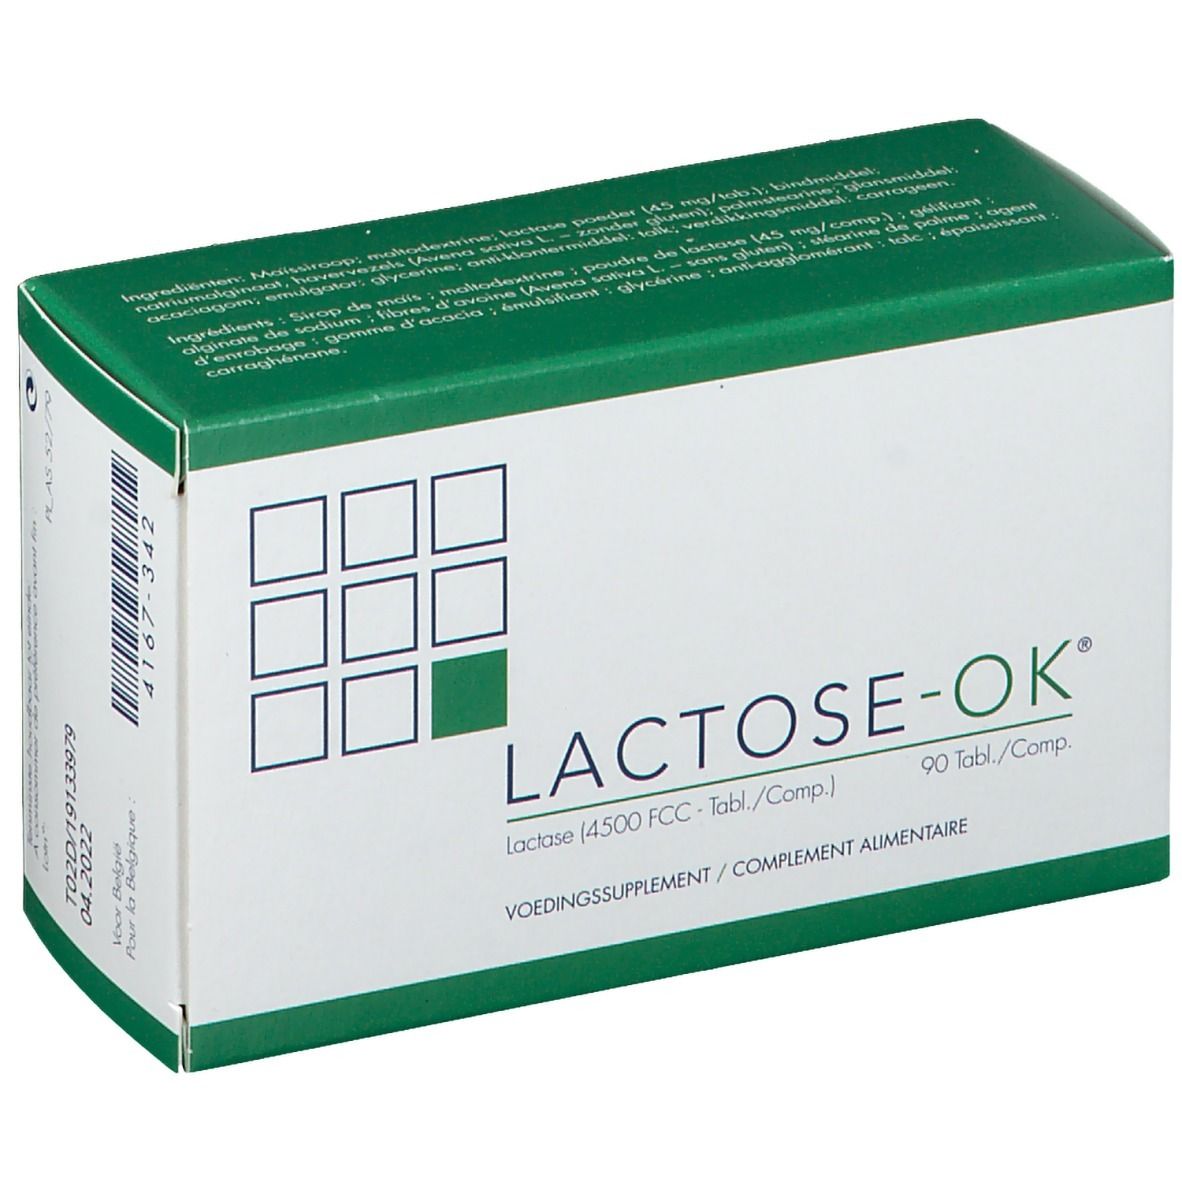 Image of LACTOSE-OK®